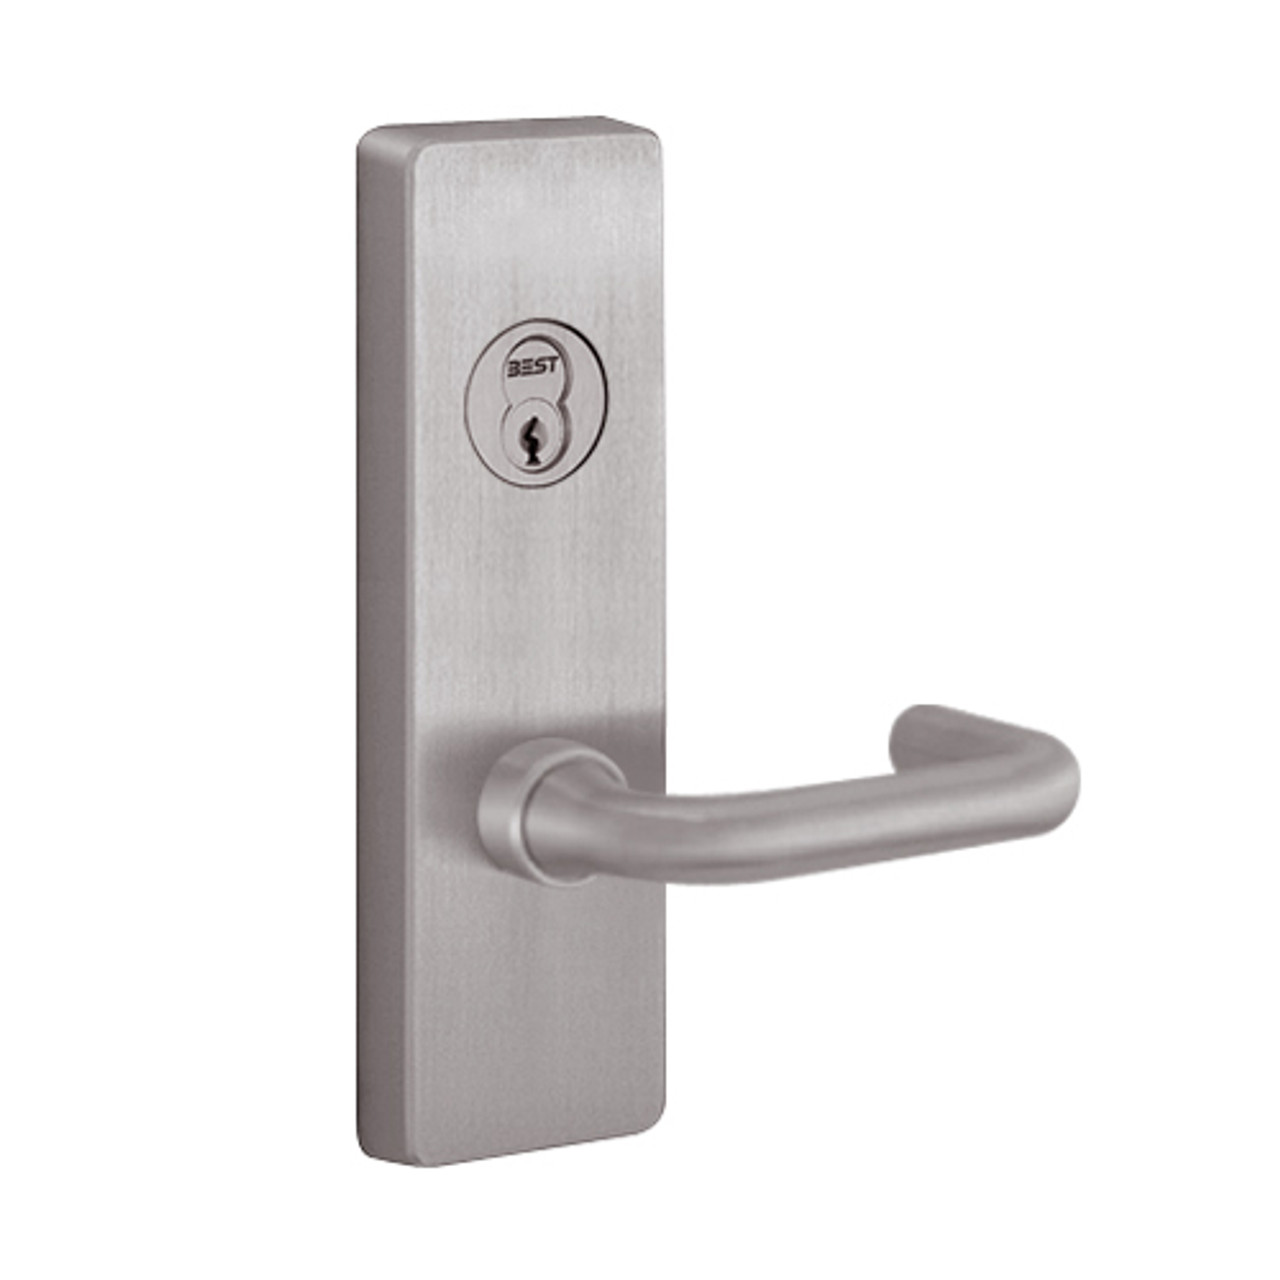 M4903C-630-LHR PHI Key Retracts Latchbolt Trim with C Lever Design for Apex and Olympian Series Exit Device in Satin Stainless Steel